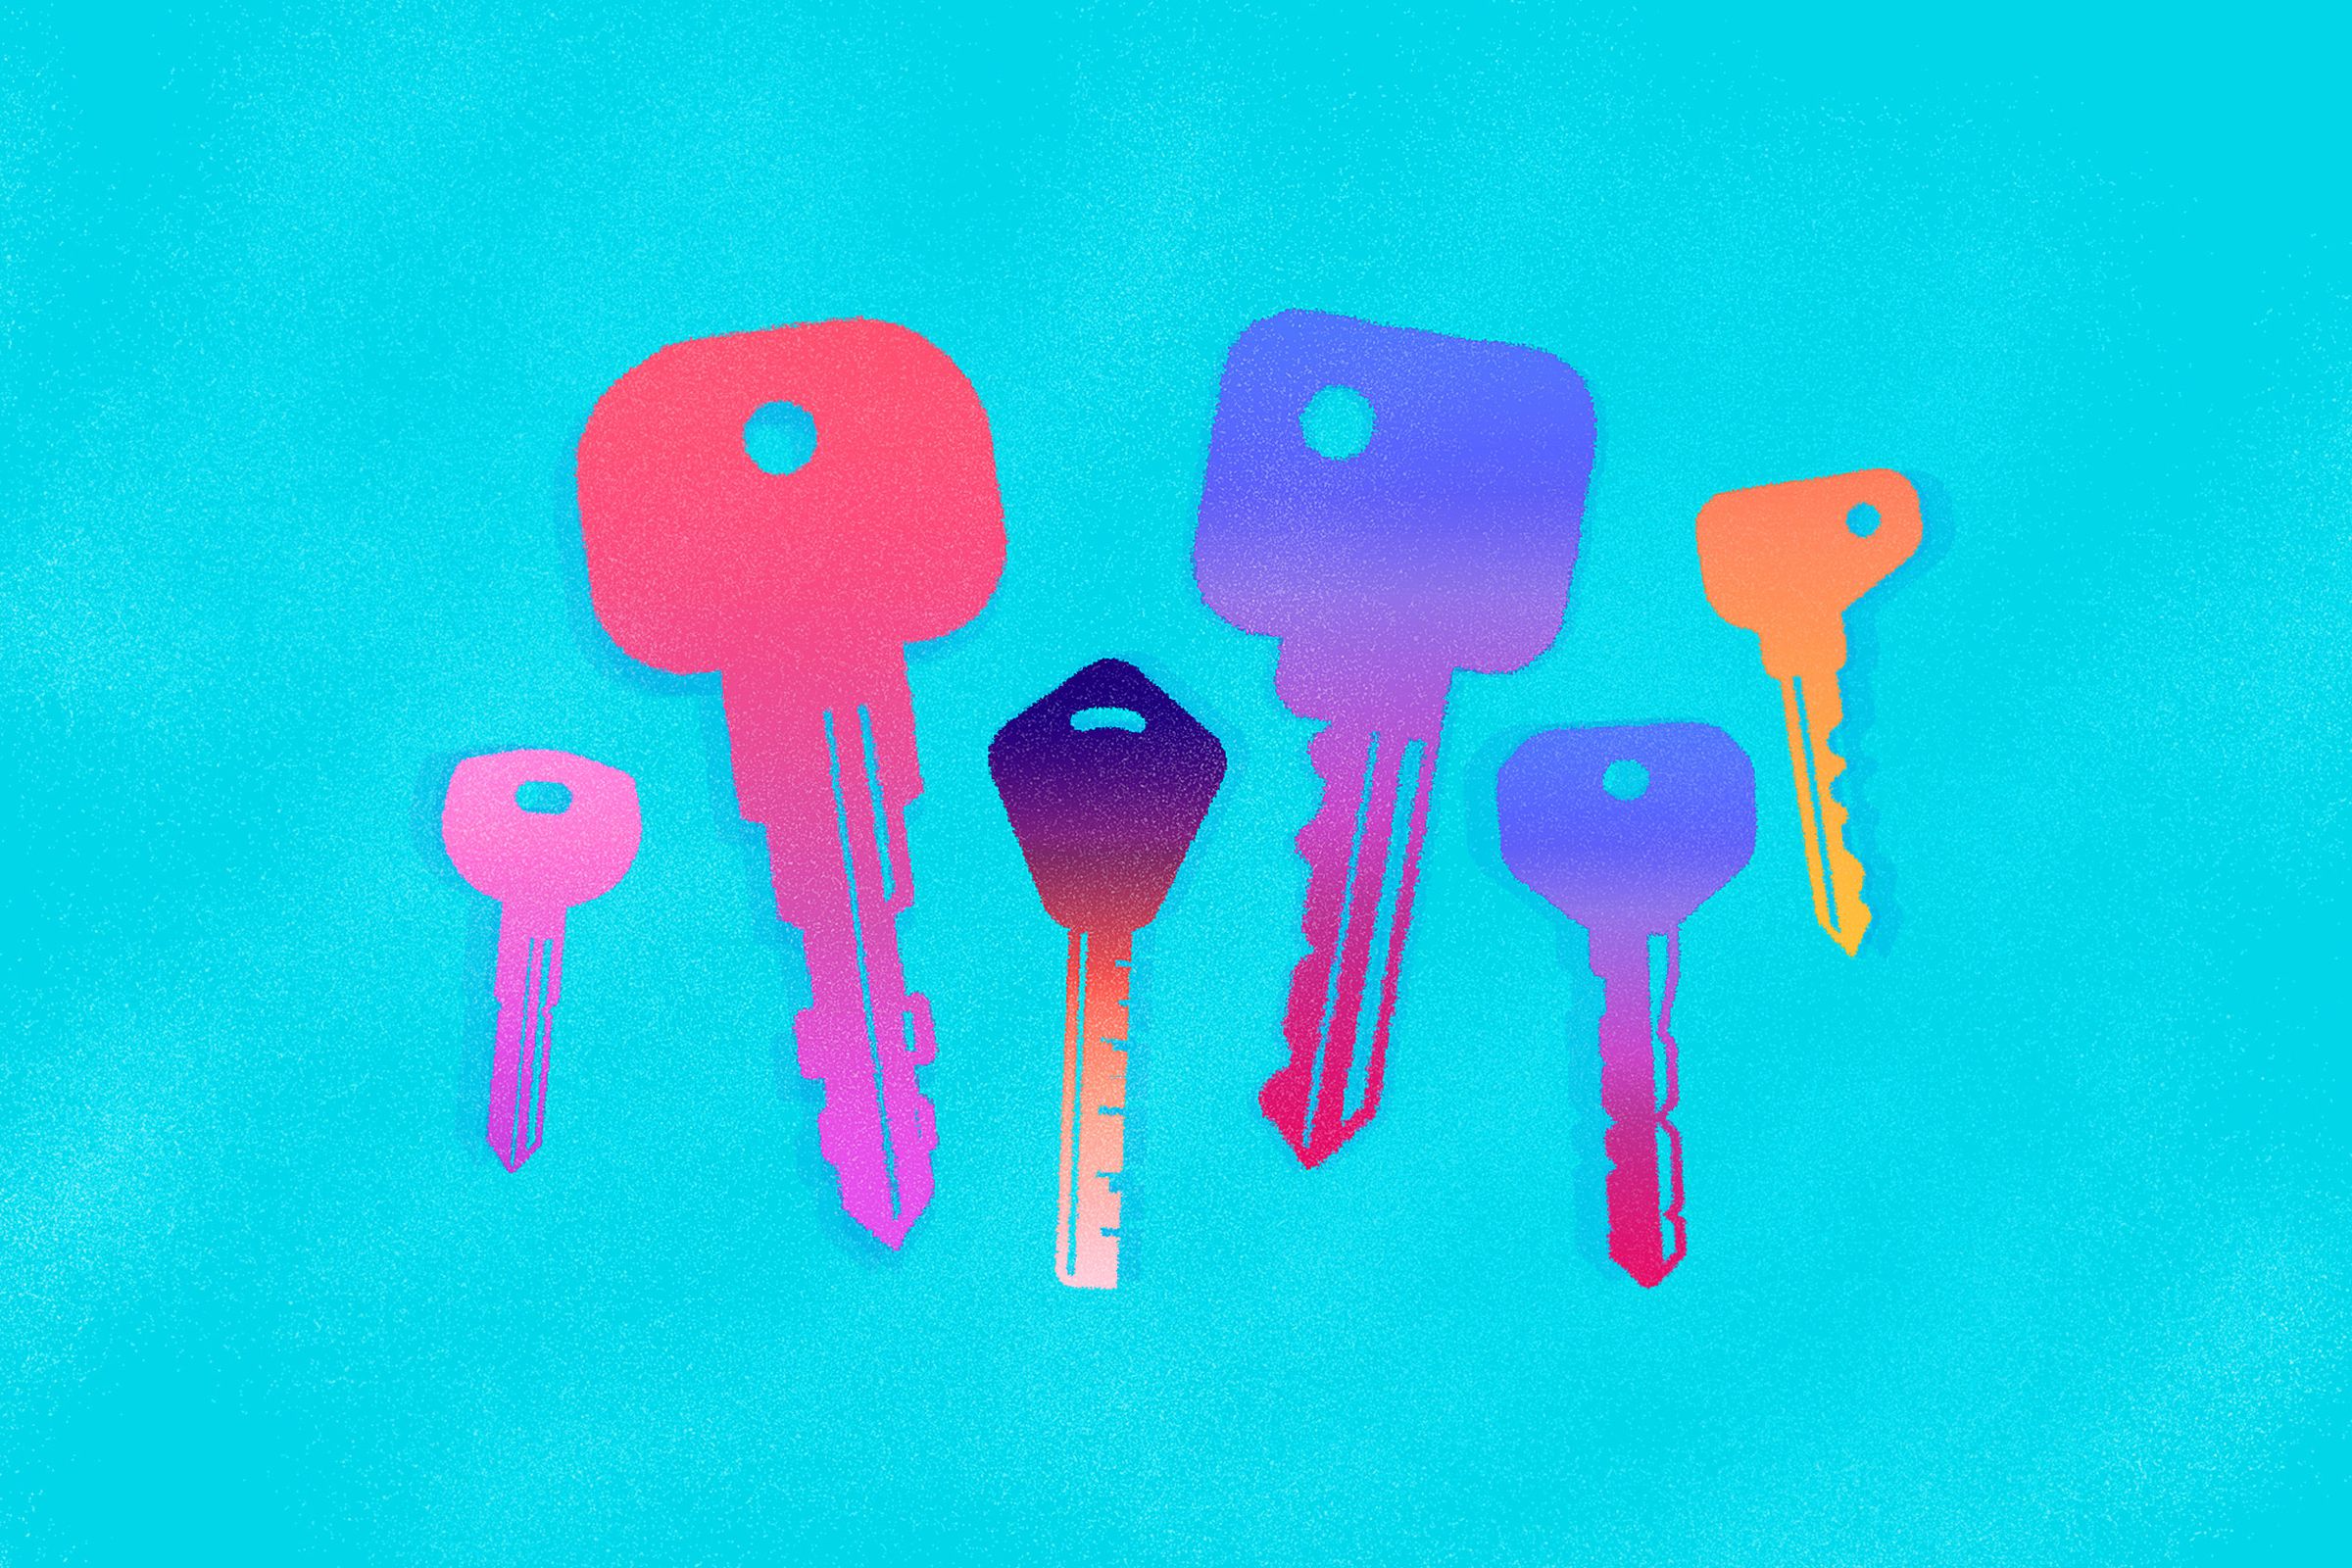 Illustration showing six different multicolored door keys on a light blue background.